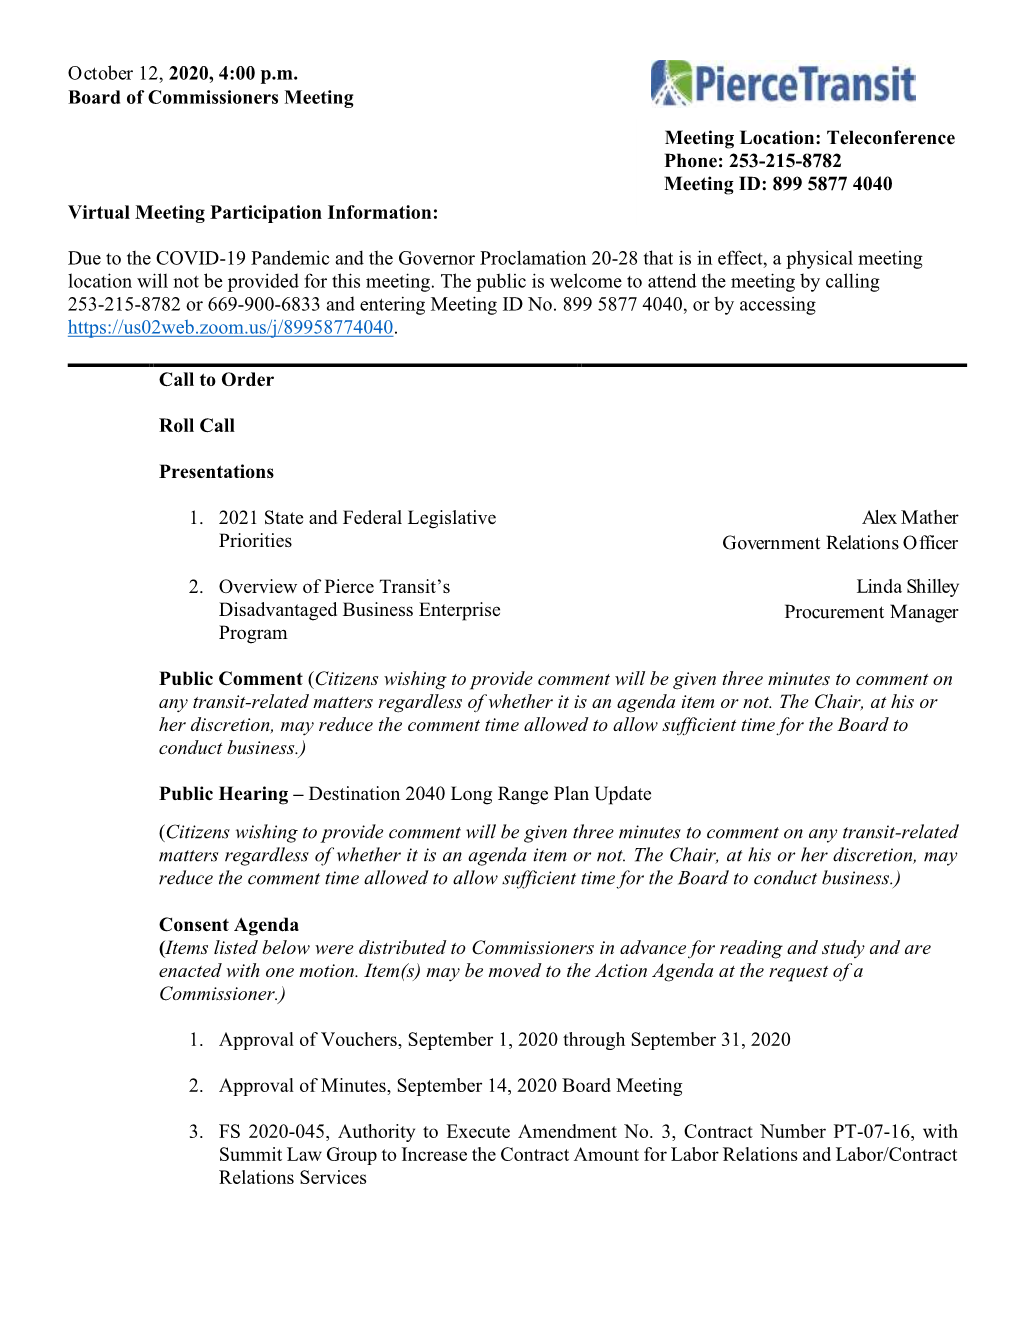 October 12, 2020, 4:00 P.M. Board of Commissioners Meeting Virtual Meeting Participation Information: Due to the COVID-19 Pandem